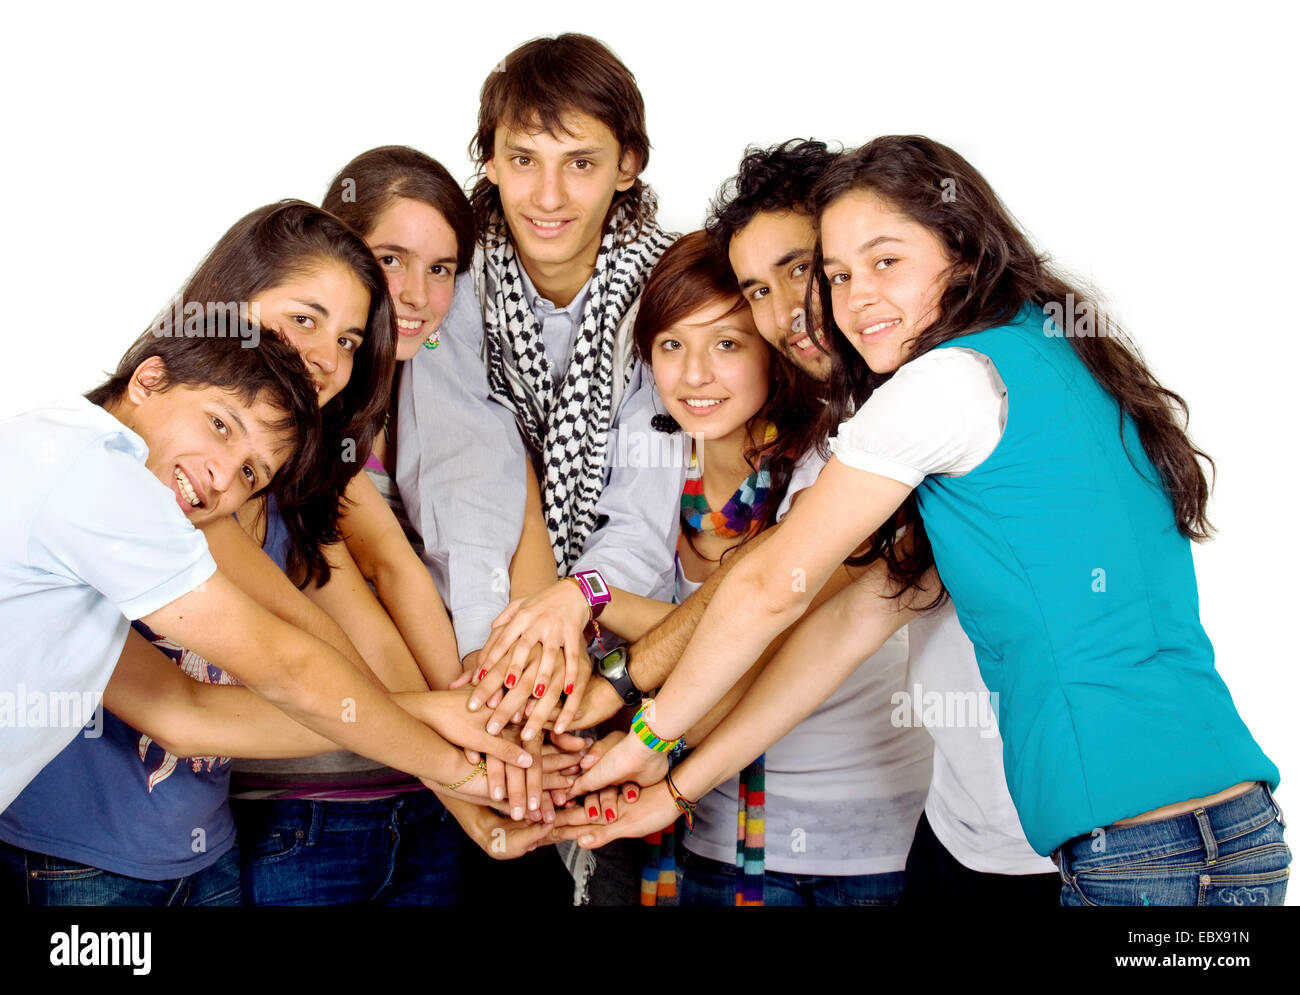 group of friends united all smiling Stock Photo